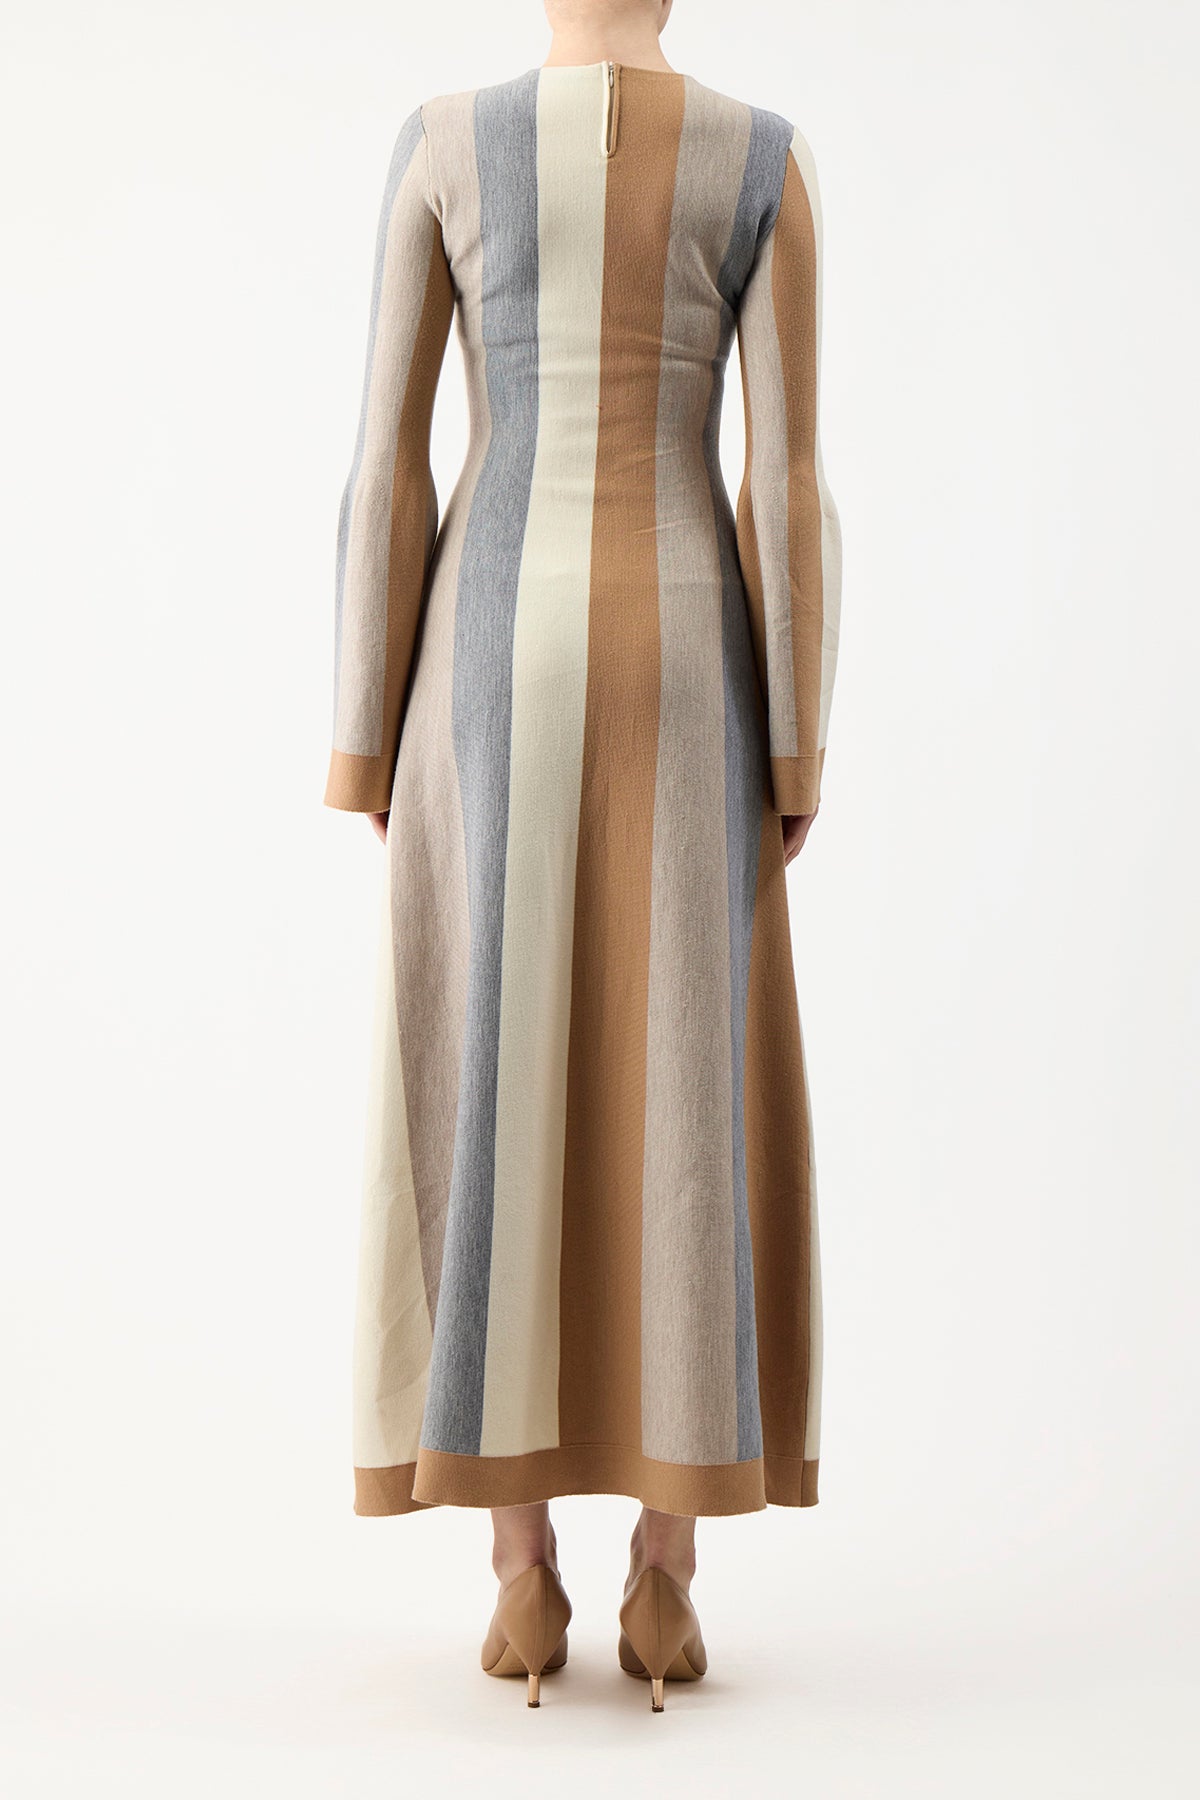 Quinlan Dress in Ivory Multi Striped Cashmere Wool